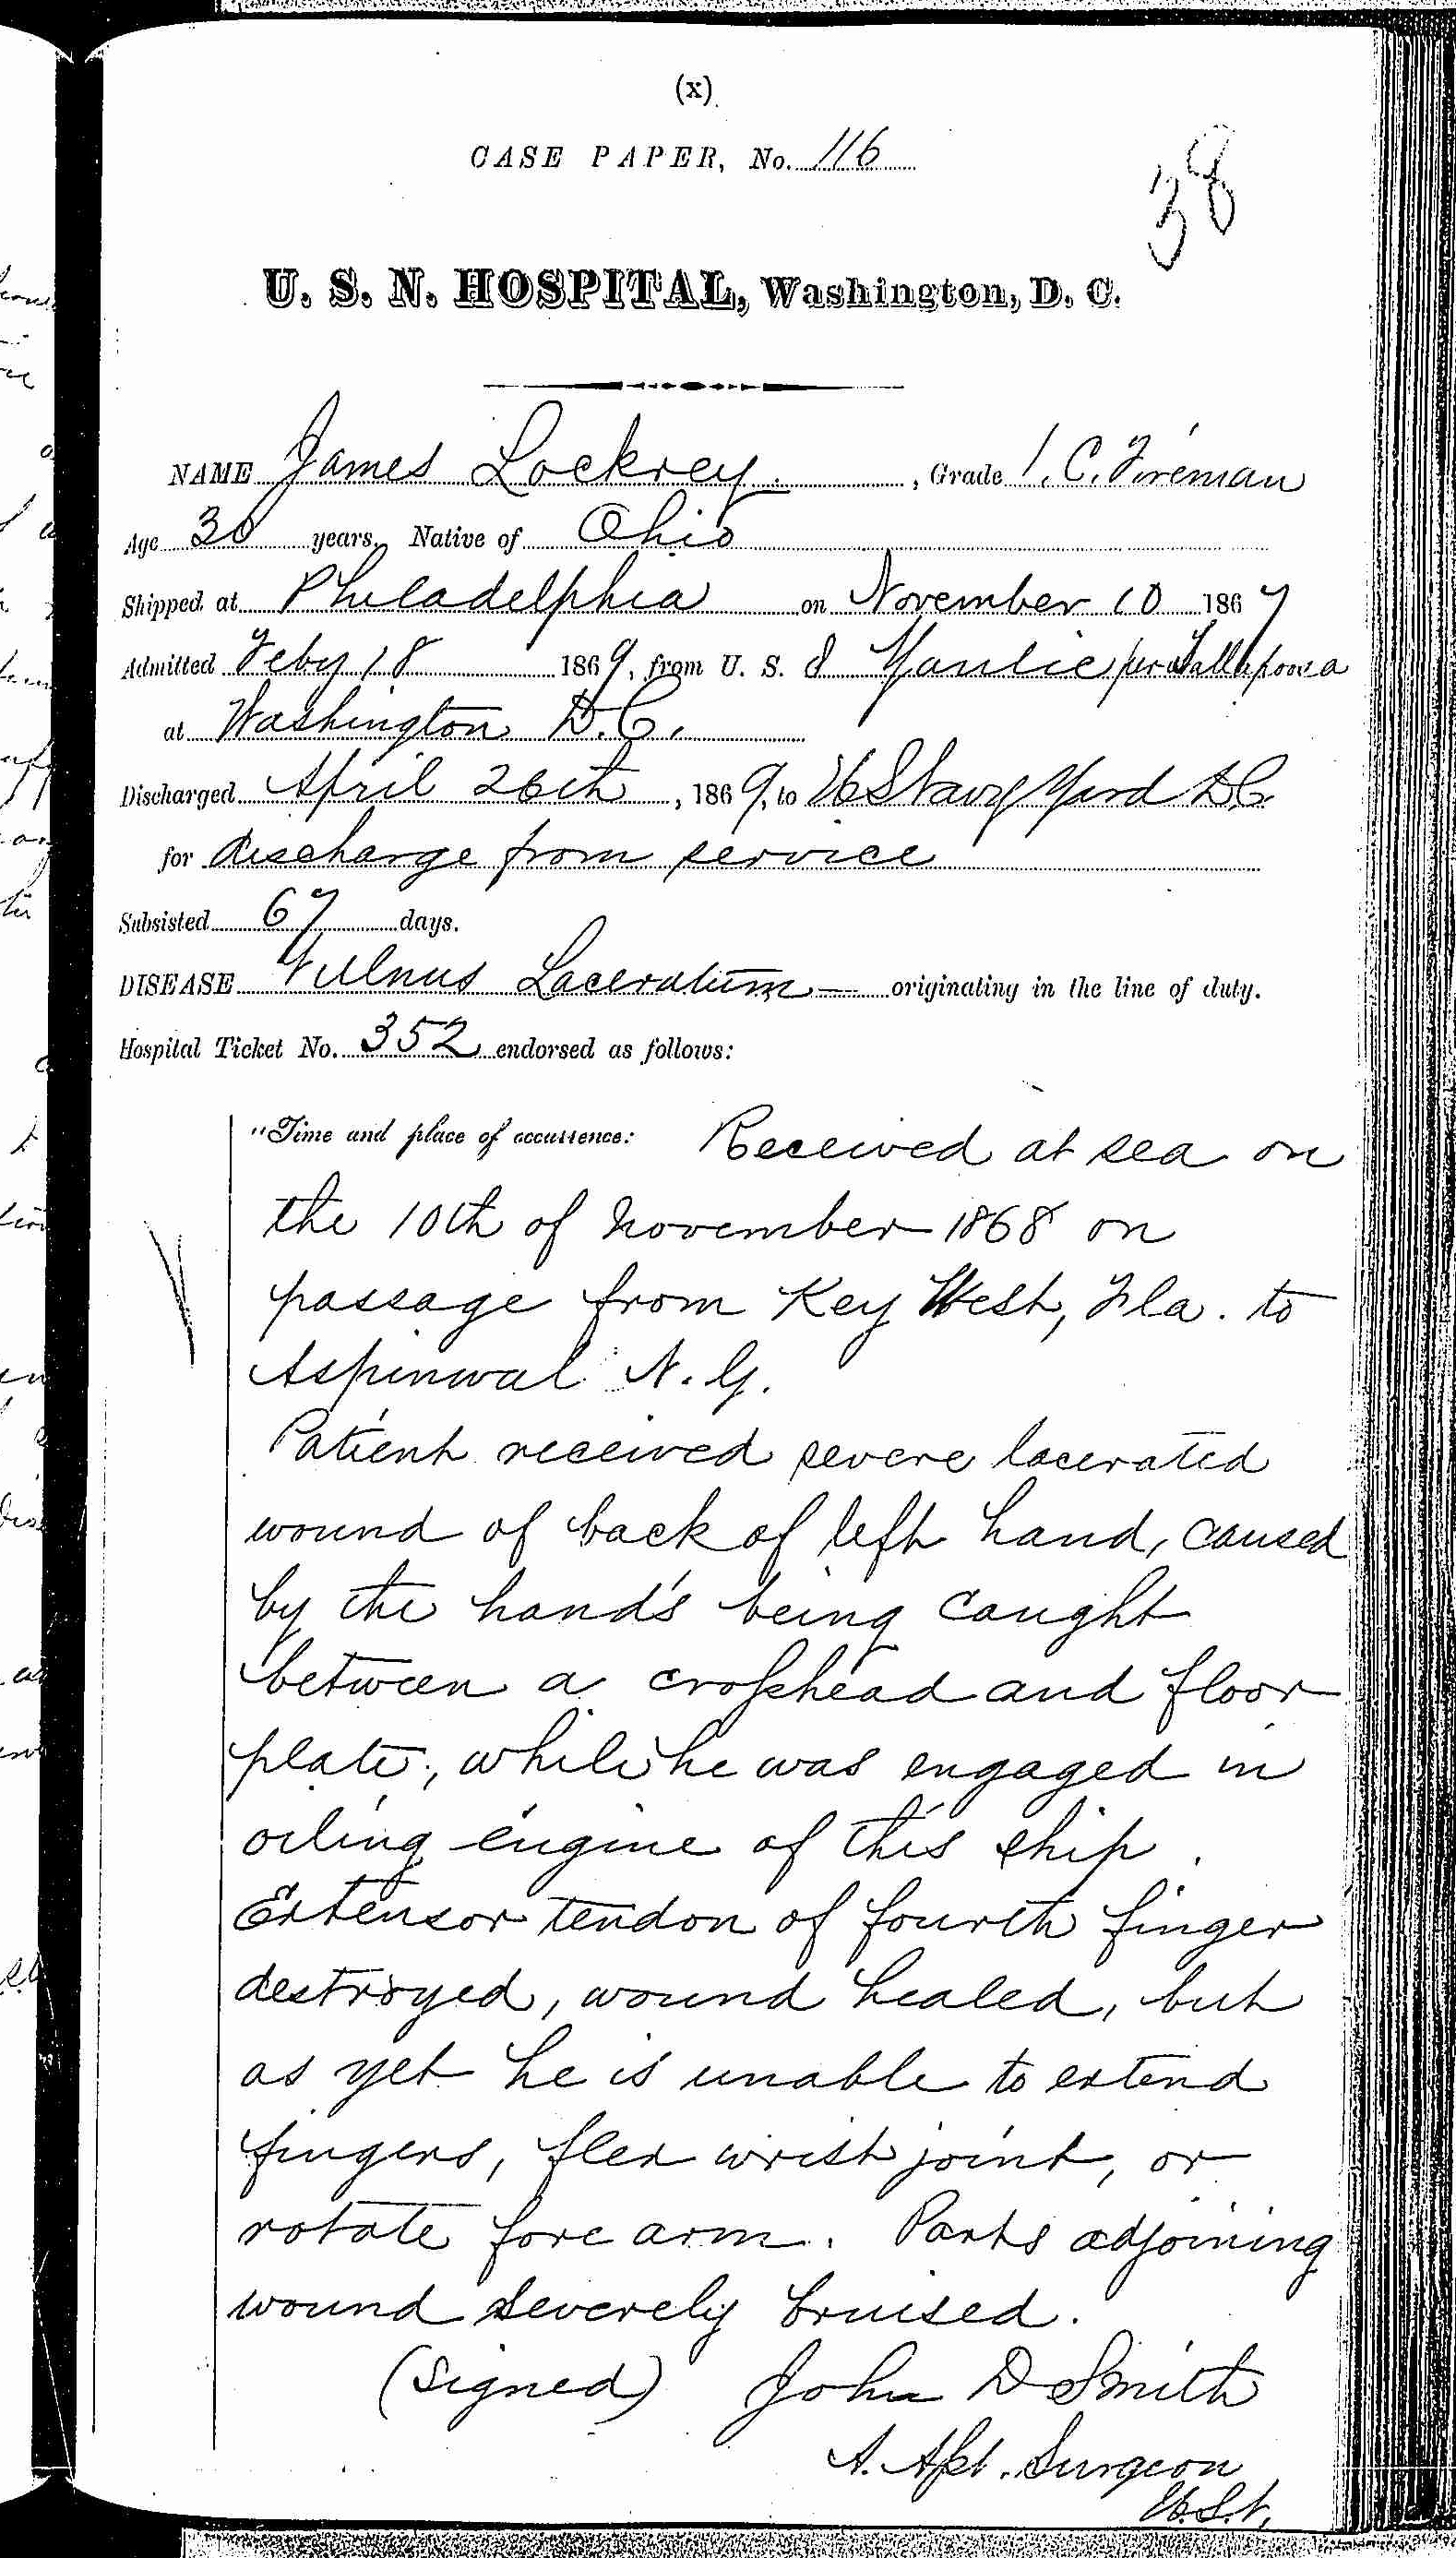 Entry for James Lockrey (page 1 of 5) in the log Hospital Tickets and Case Papers - Naval Hospital - Washington, D.C. - 1868-69